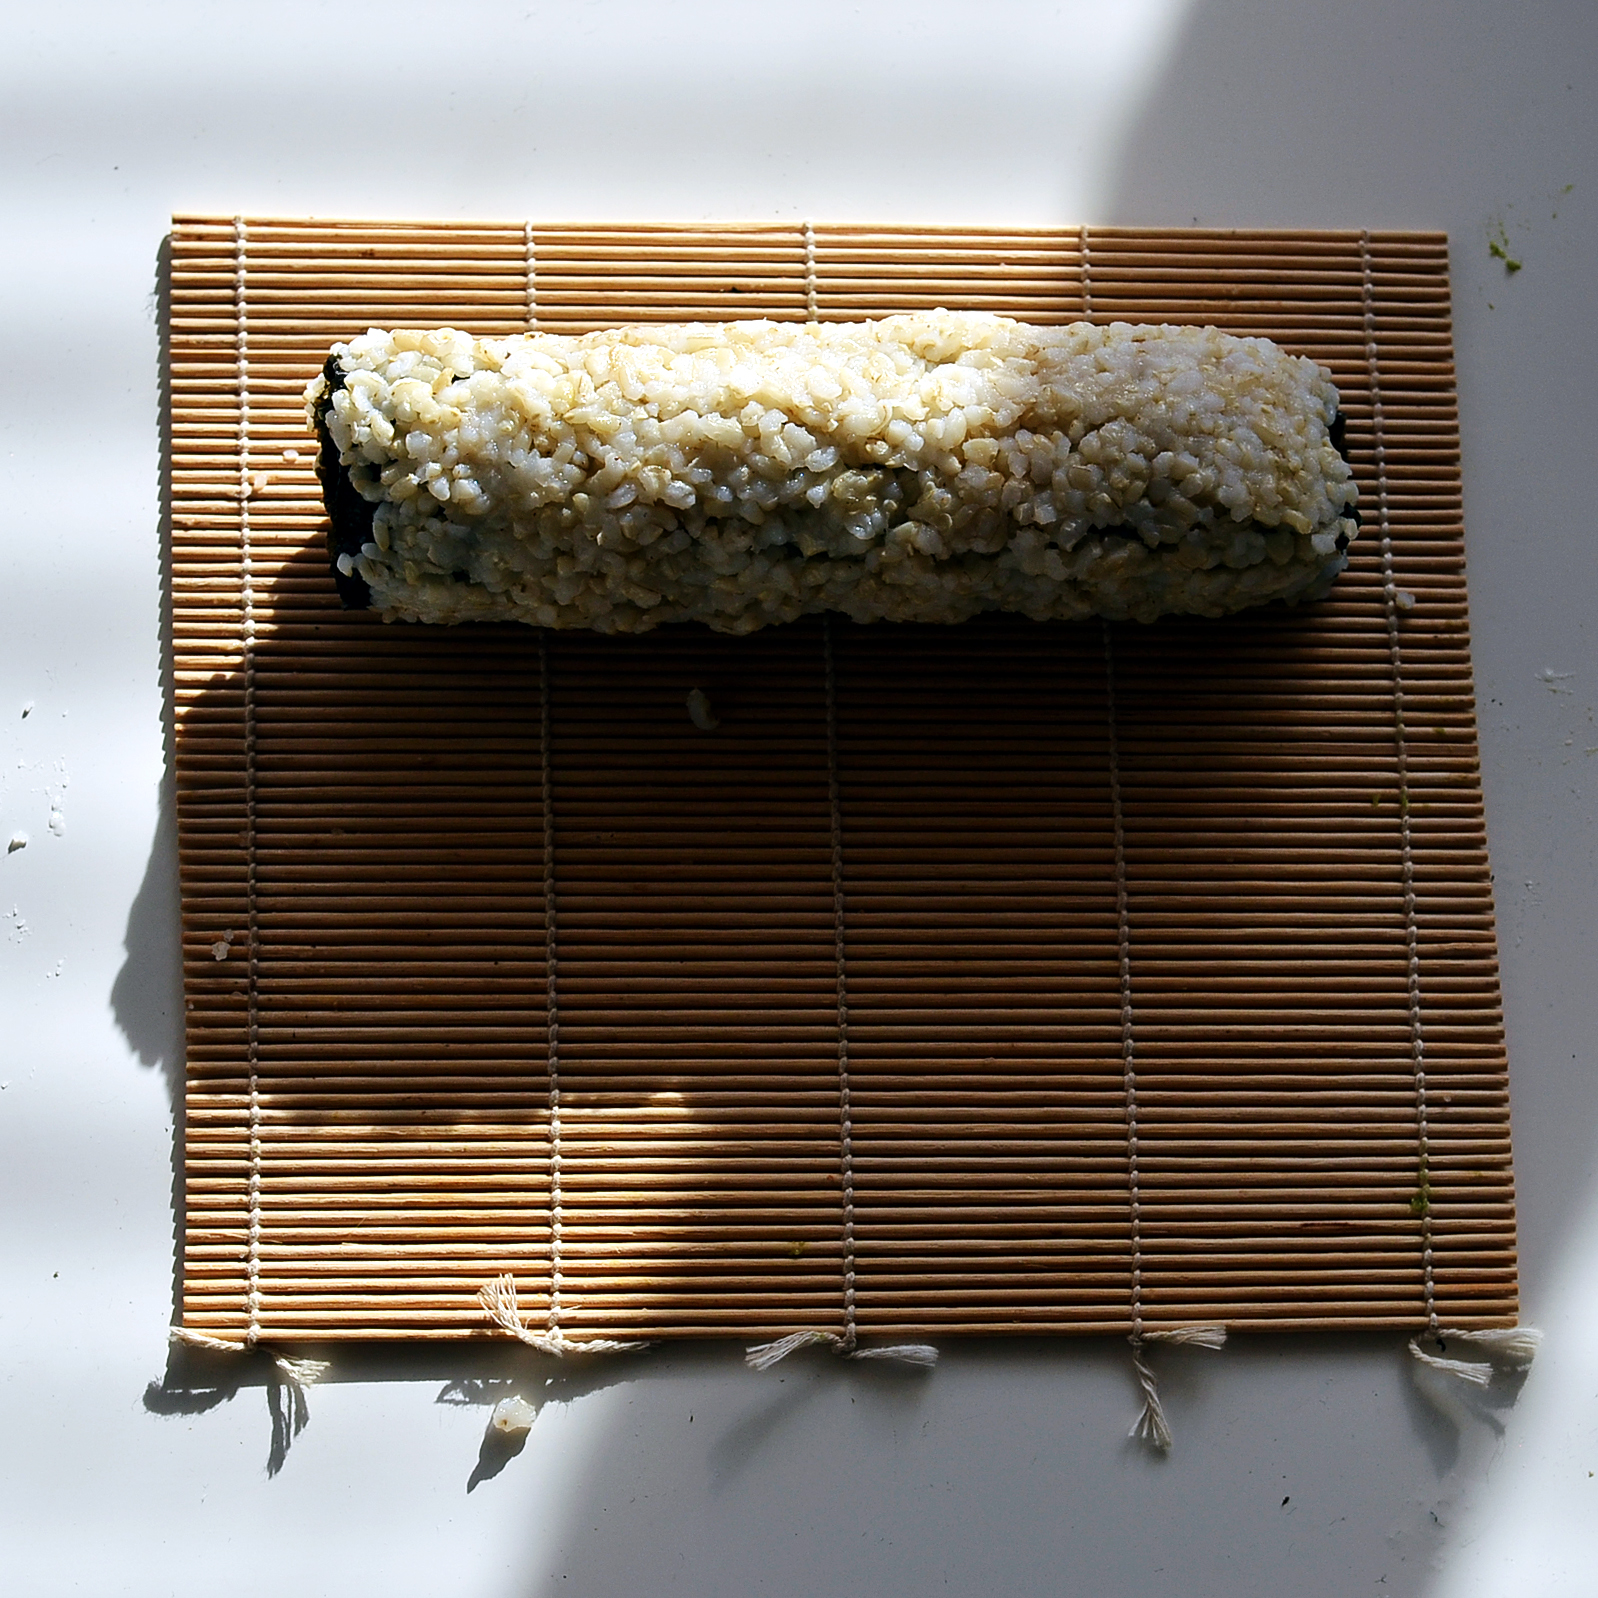 How to Roll Sushi—The Ultimate Guide « Food Hacks :: WonderHowTo